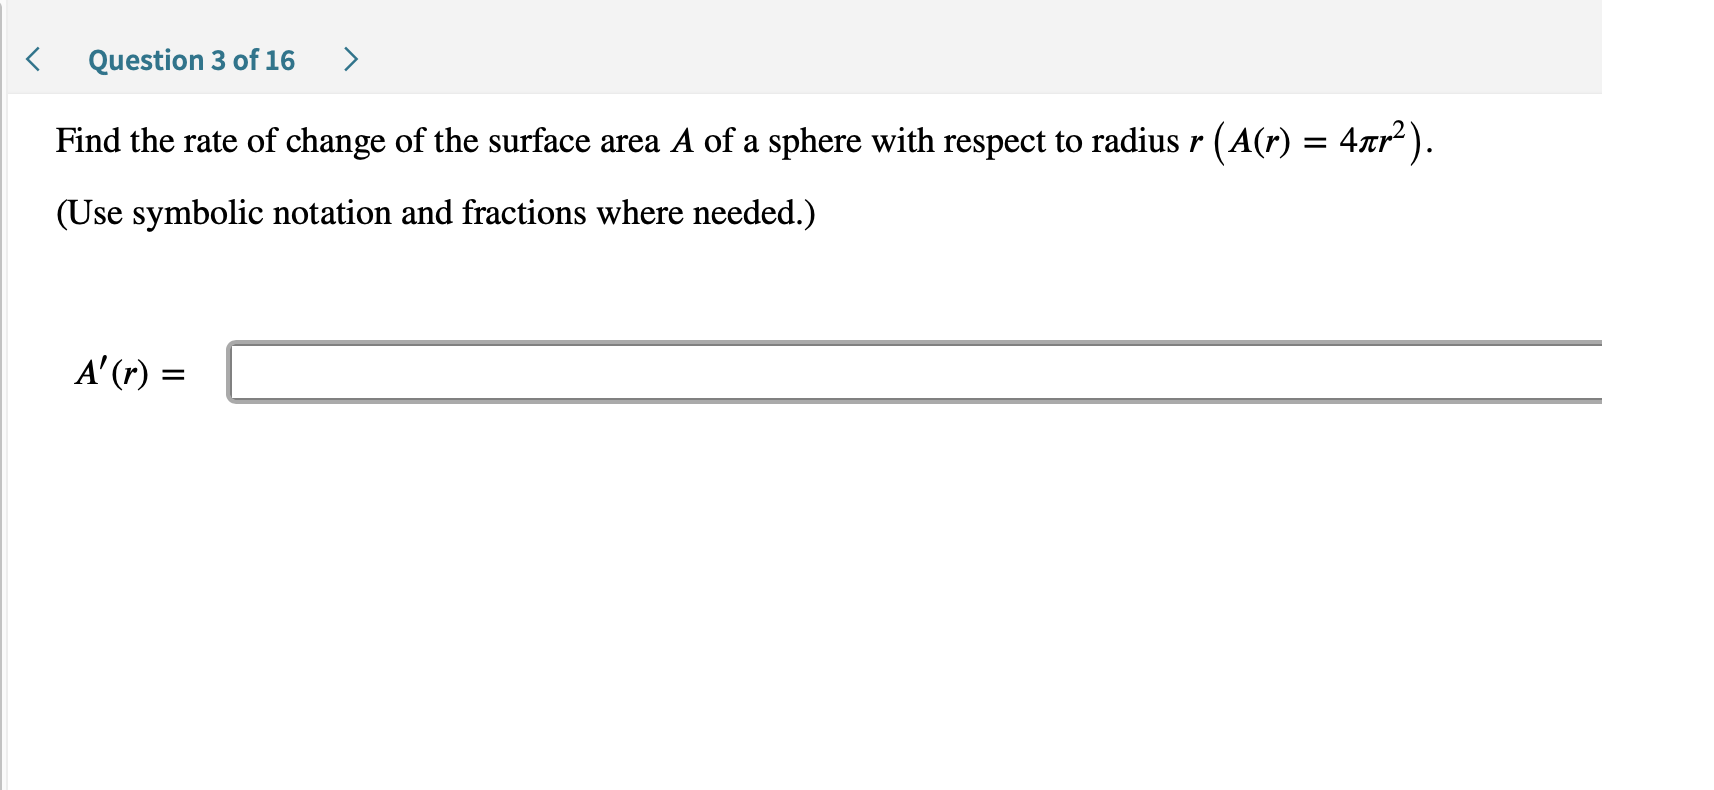 Question 3 of 16
Find the rate of change of the surface area A of a sphere with respect to radius r (A(r) = 4nr2).
(Use symbolic notation and fractions where needed.)
A'(r)
